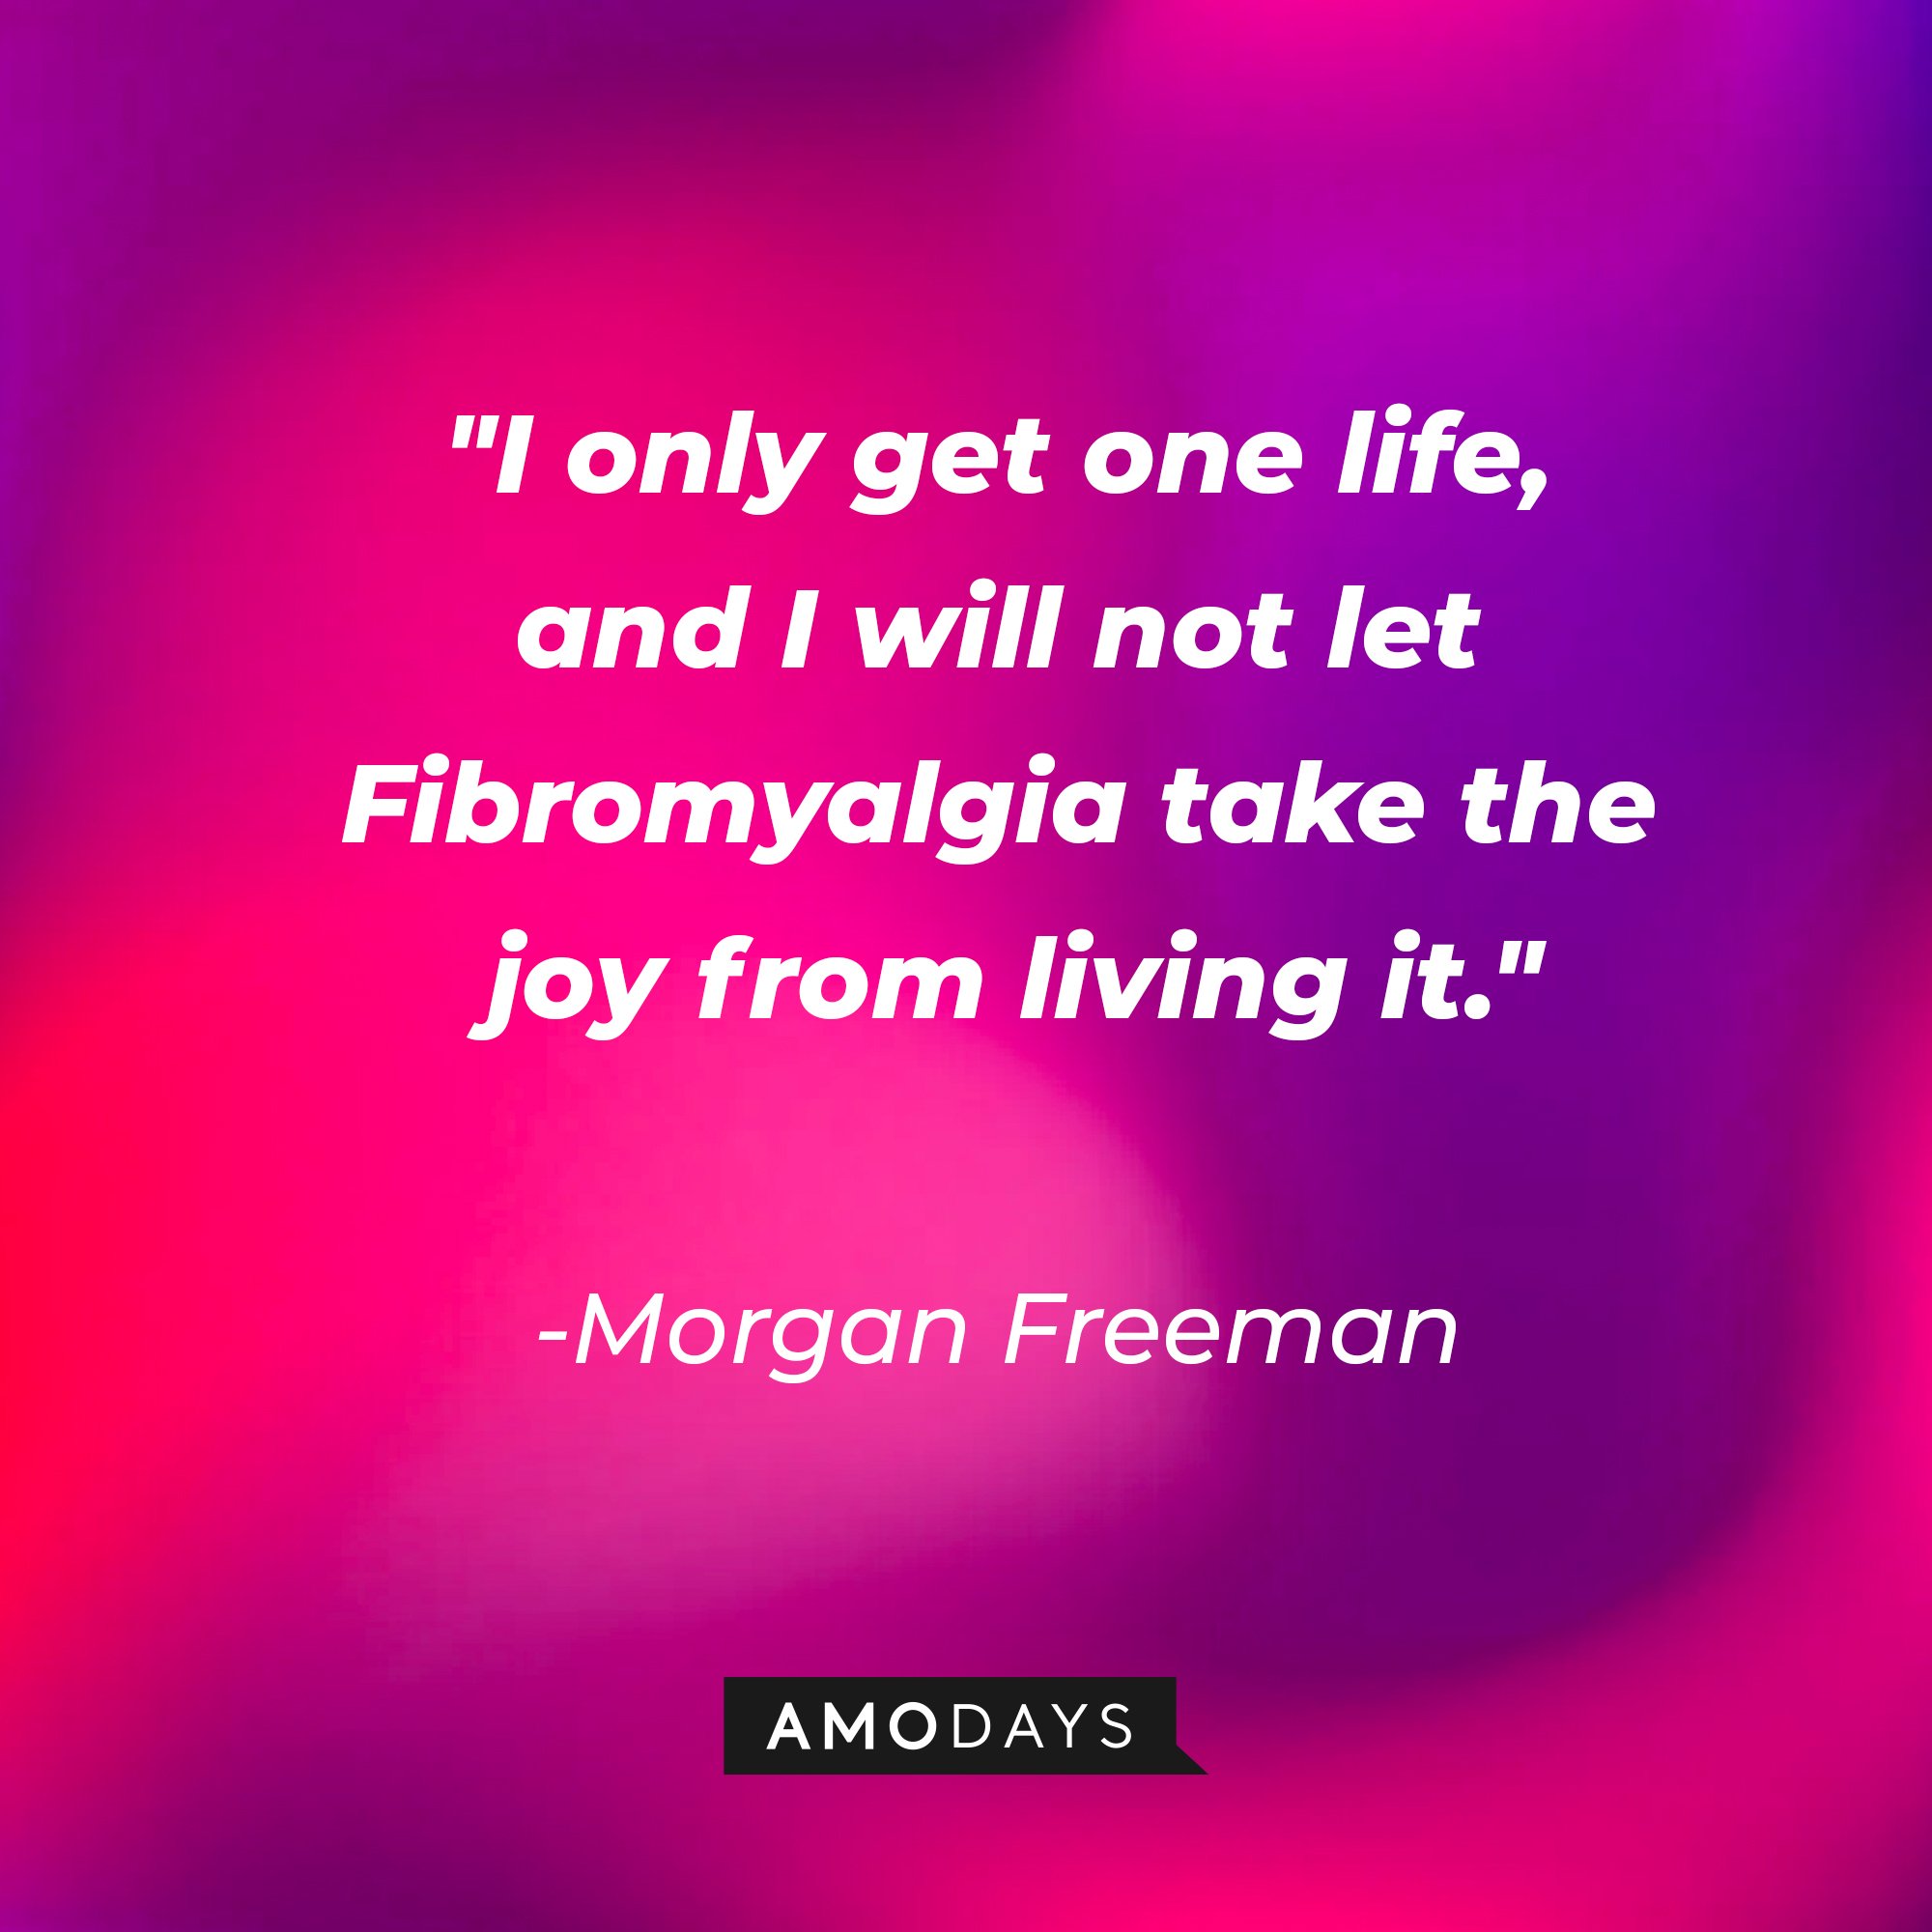  Morgan Freeman's quote: "I only get one life, and I will not let Fibromyalgia take the joy from living it." | Image: AmoDays